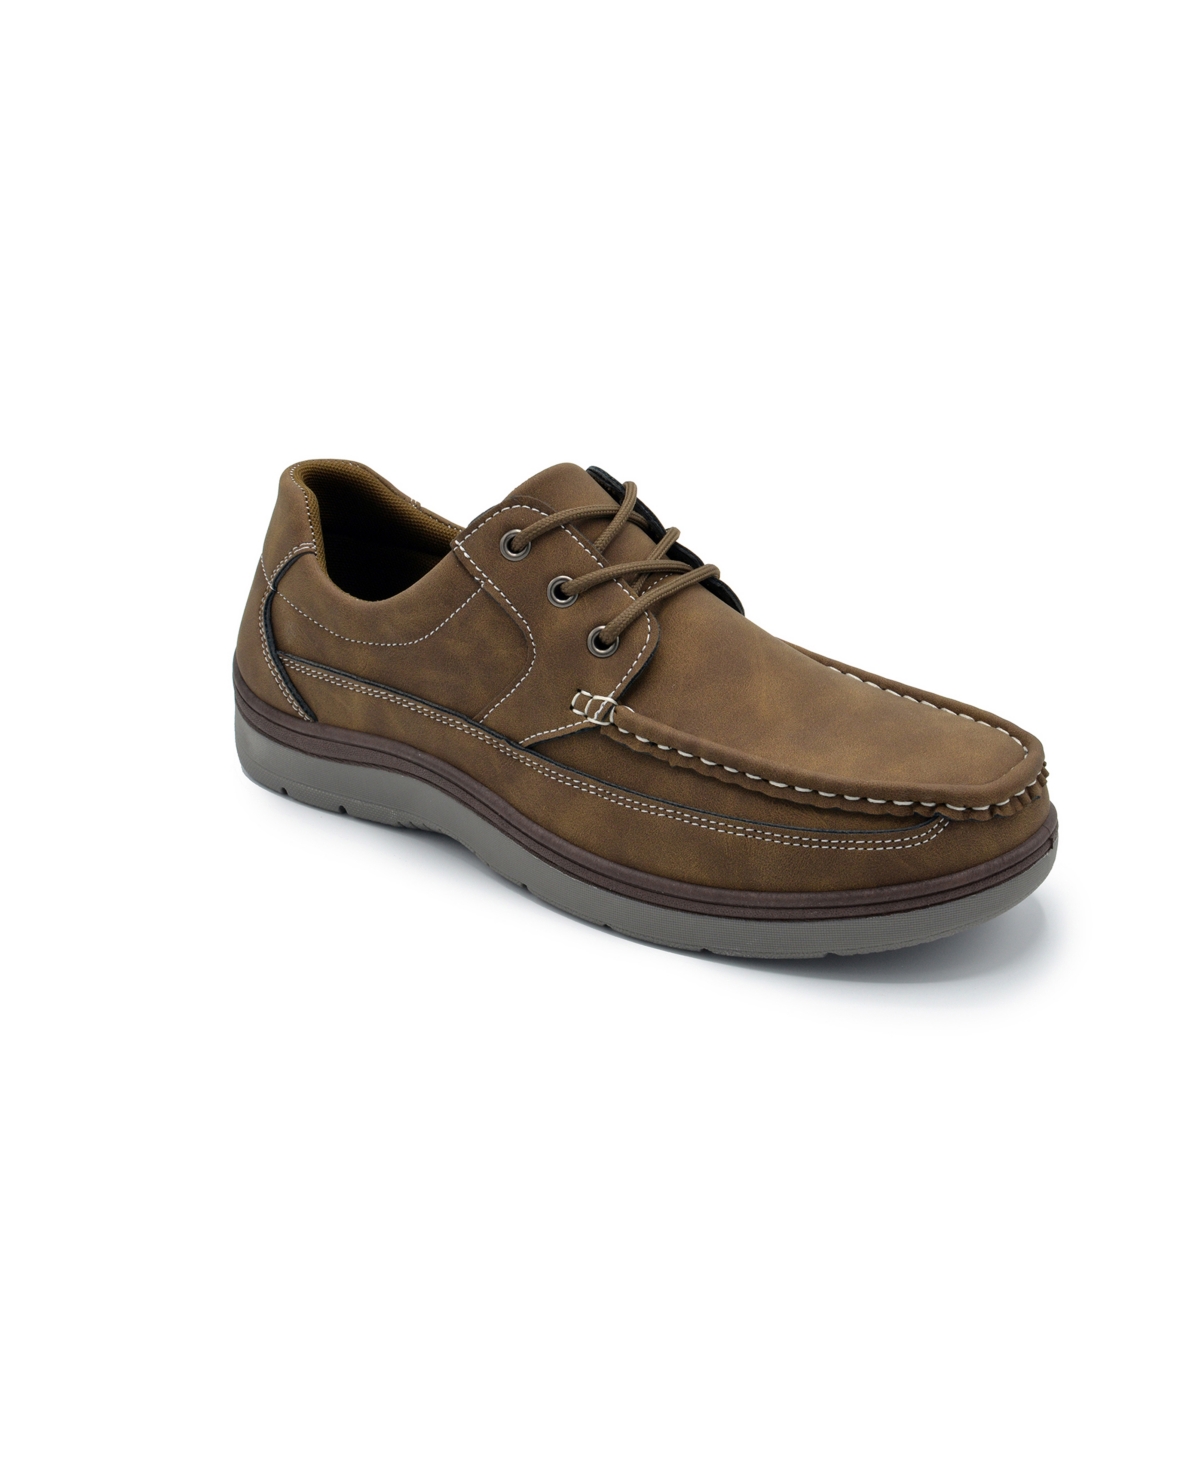 Aston Marc Men's Lace-up Walking Casual Shoes In Tan